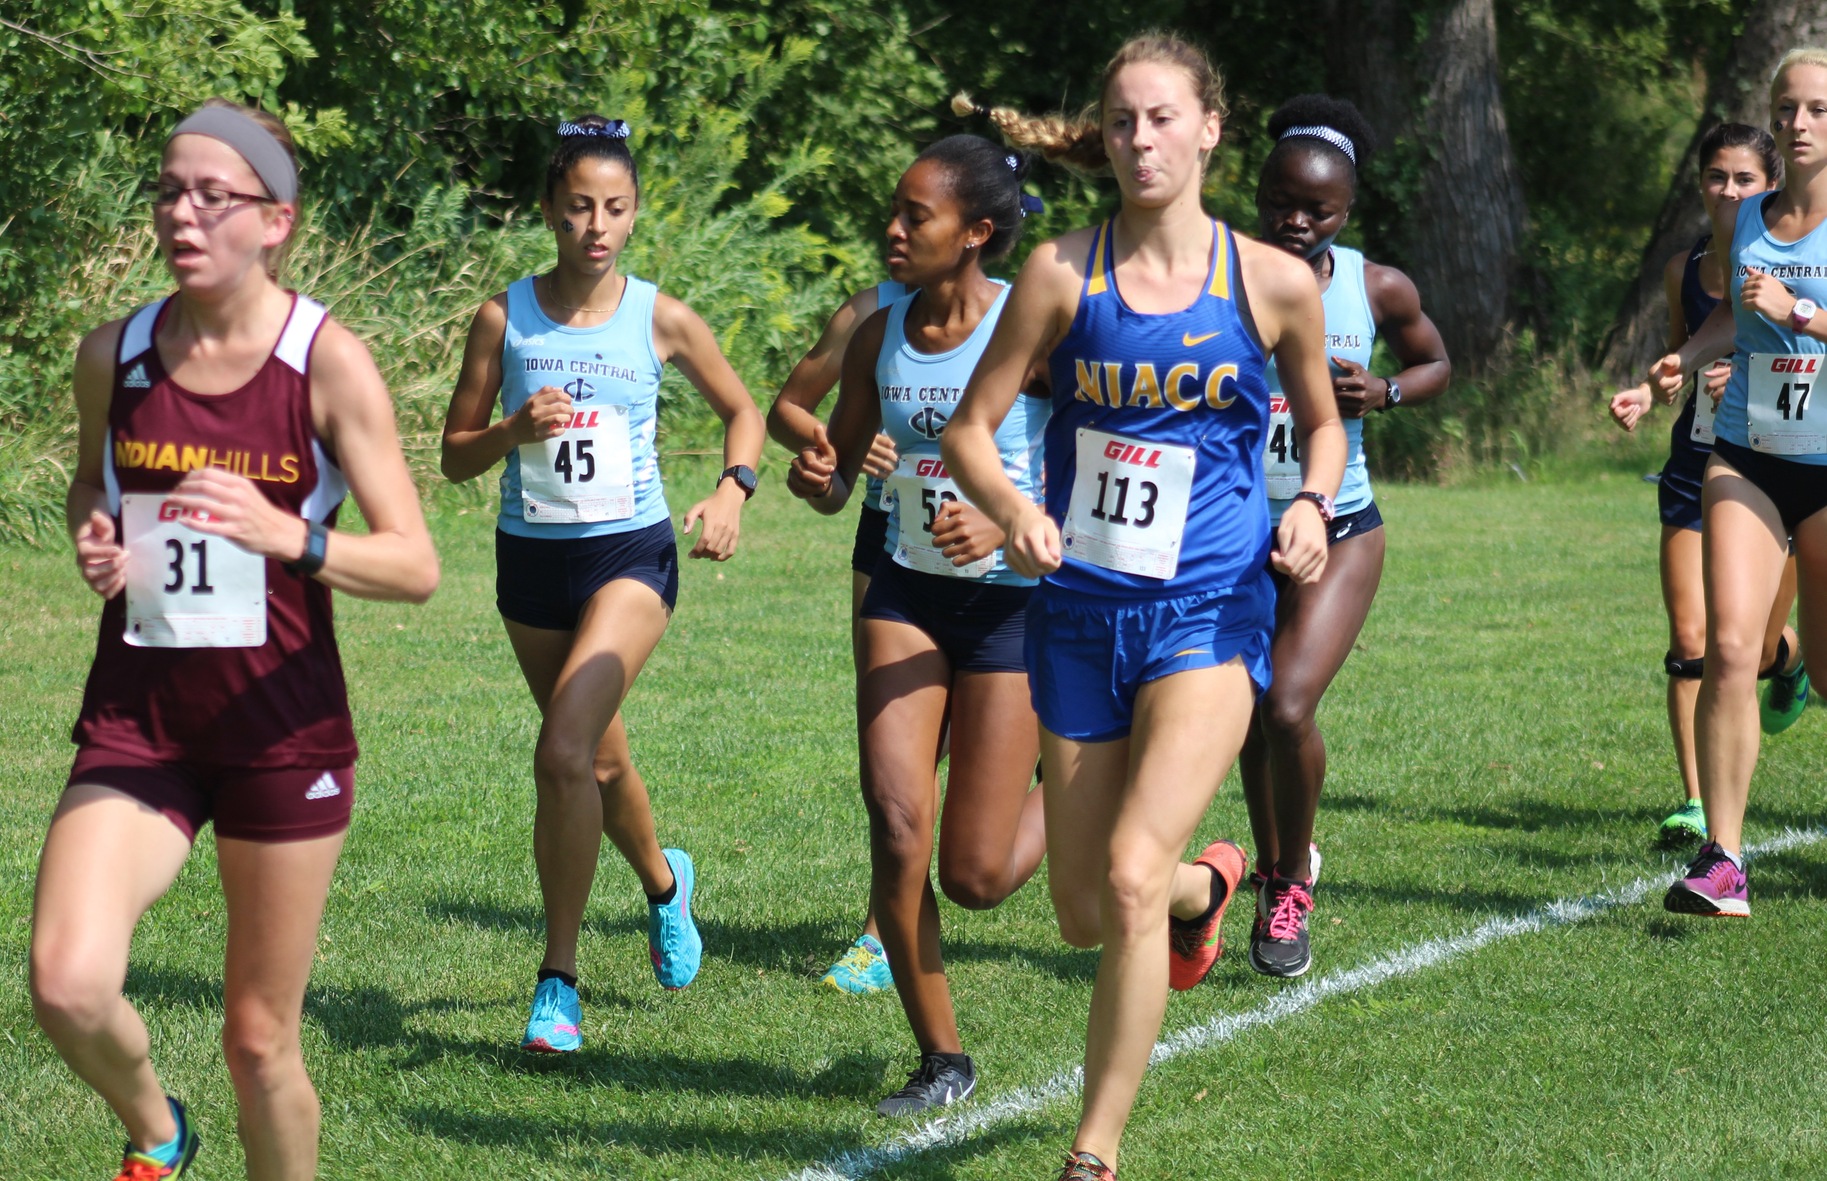 NIACC sophomore runs in the NJCAA Region XI time trial on Aug. 26 in Council Bluffs.